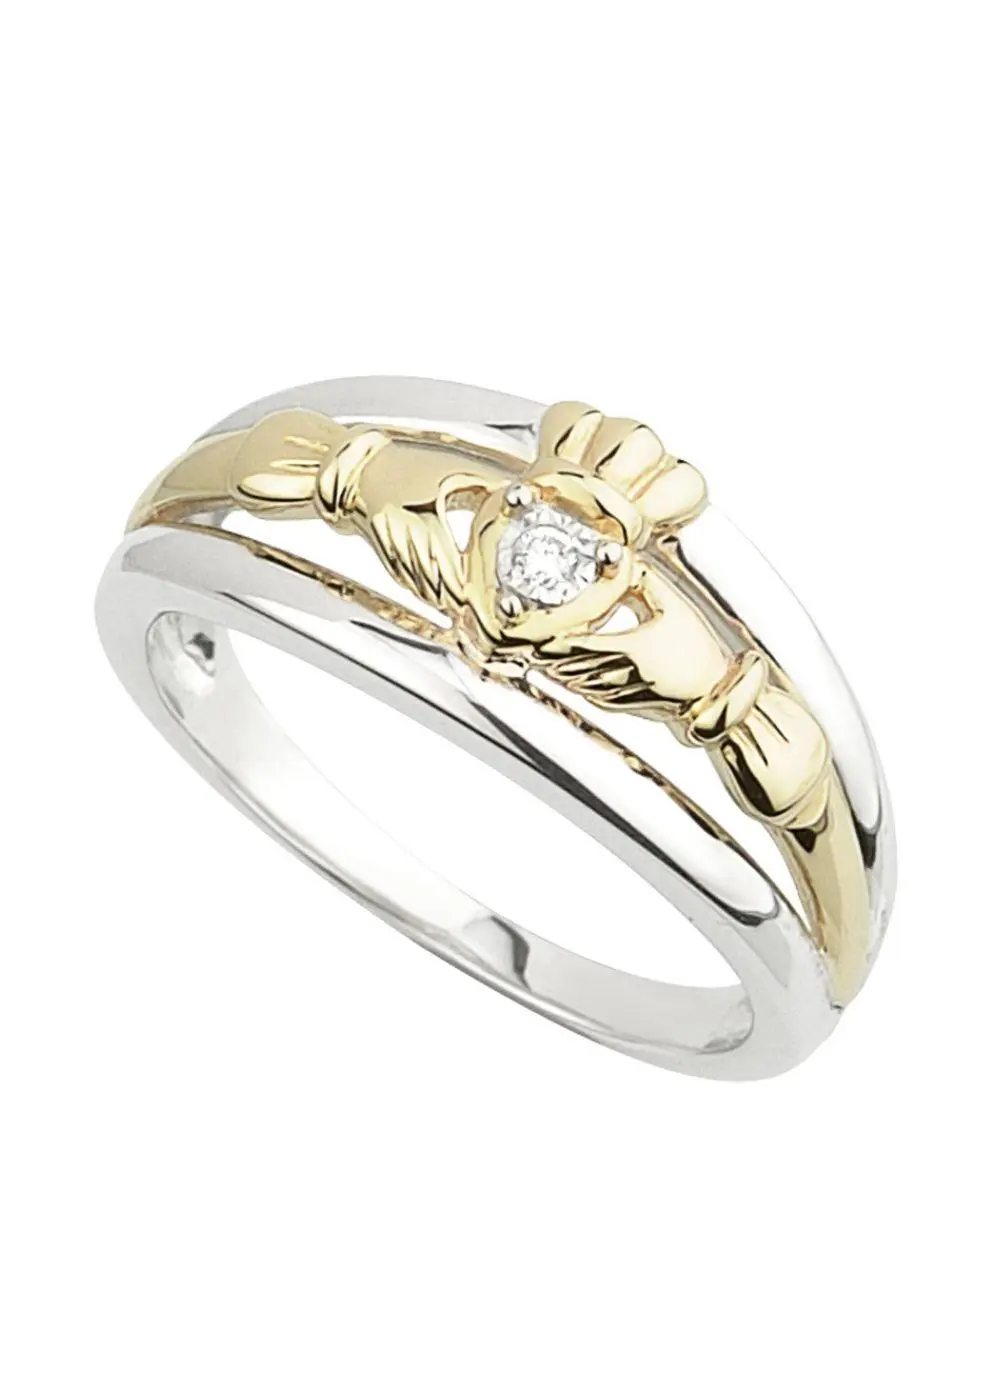 10ct Gold & Sterling Silver Diamond Triple Claddagh Ring